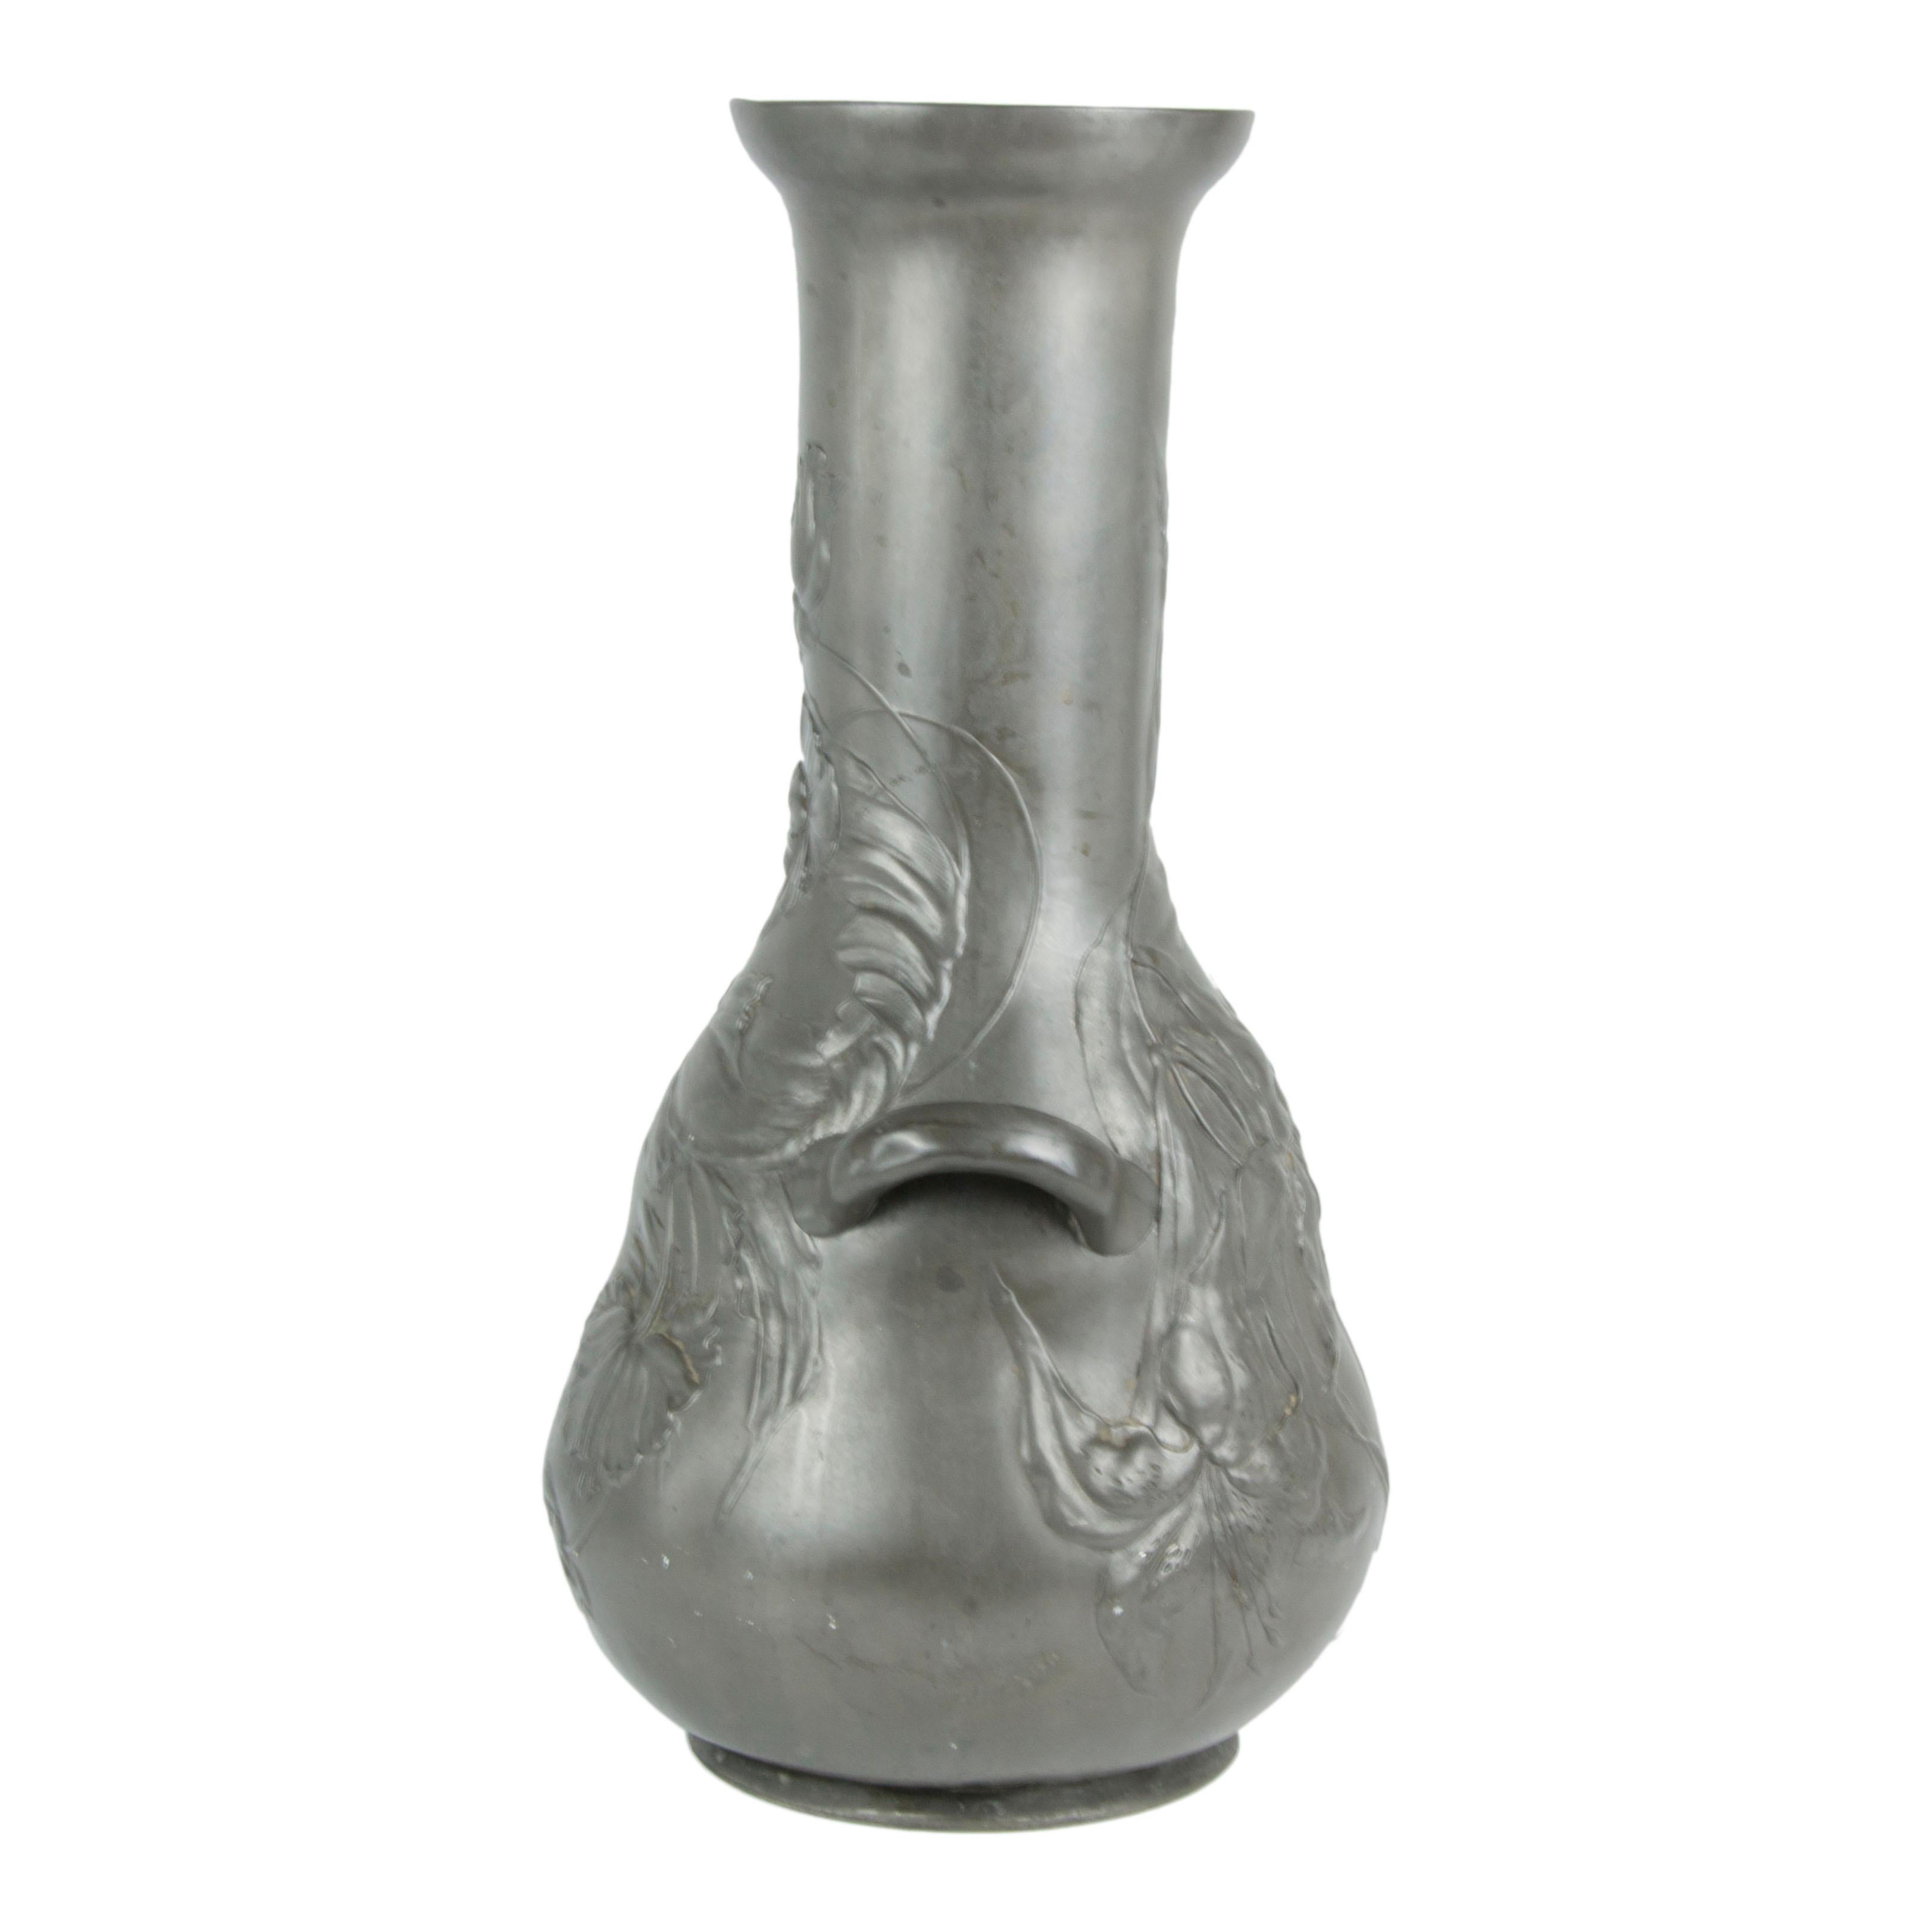 Monumental pewter vase; German; ca 1885-1910; molded pewter, having a gourd-shaped body, long neck, and inward-flared lip with low relief irises and peonies enveloping the base and neck; applied molded lug handles; marked 